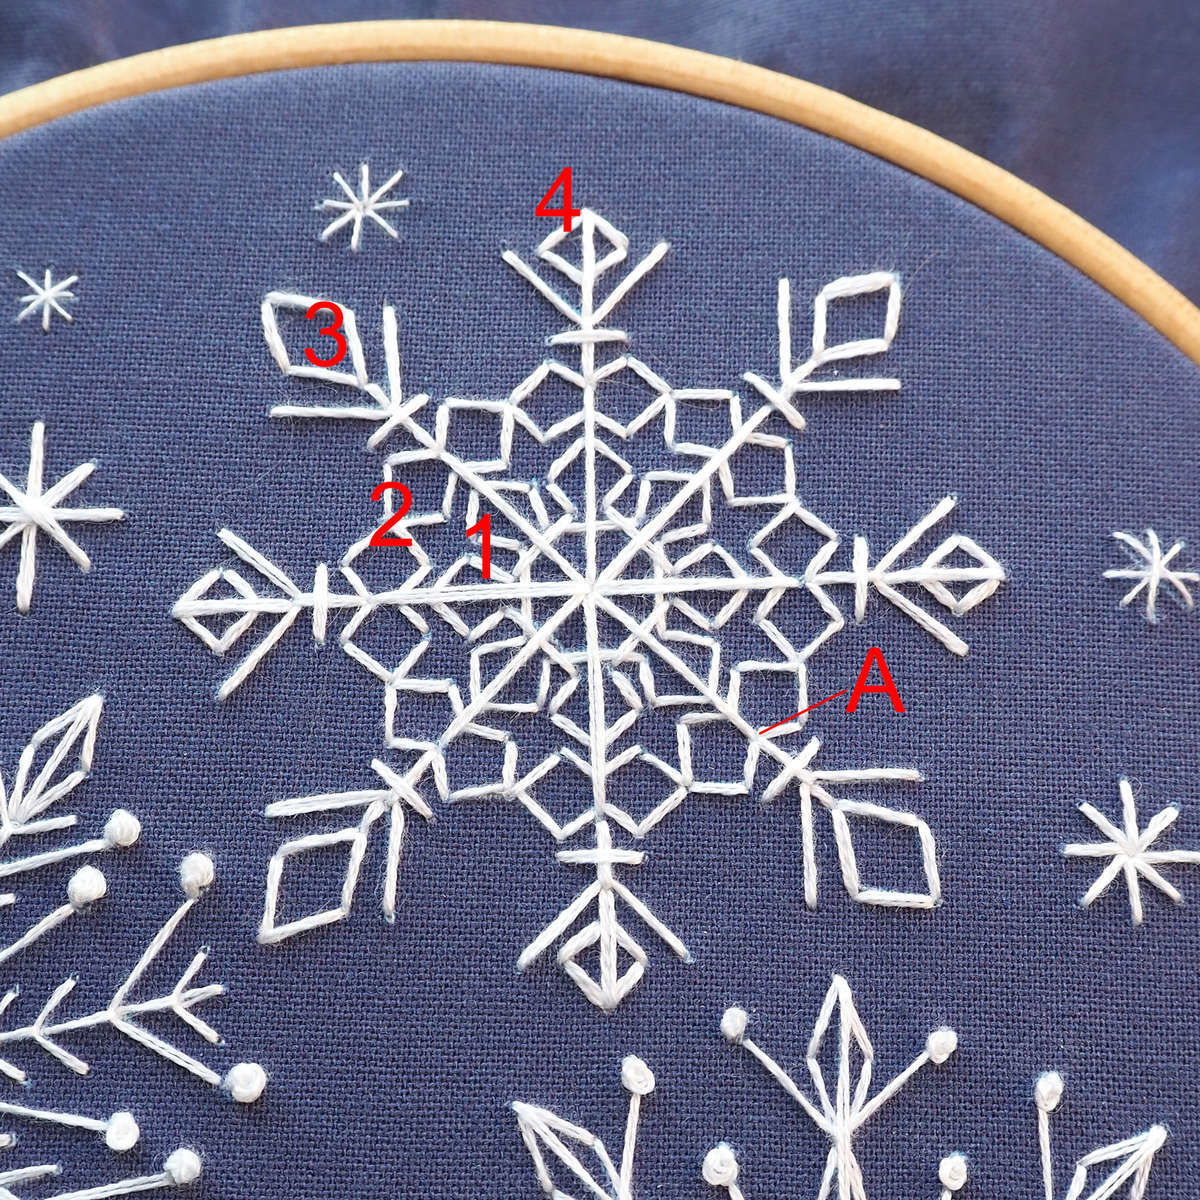 Example of an Embroidered Snowflake